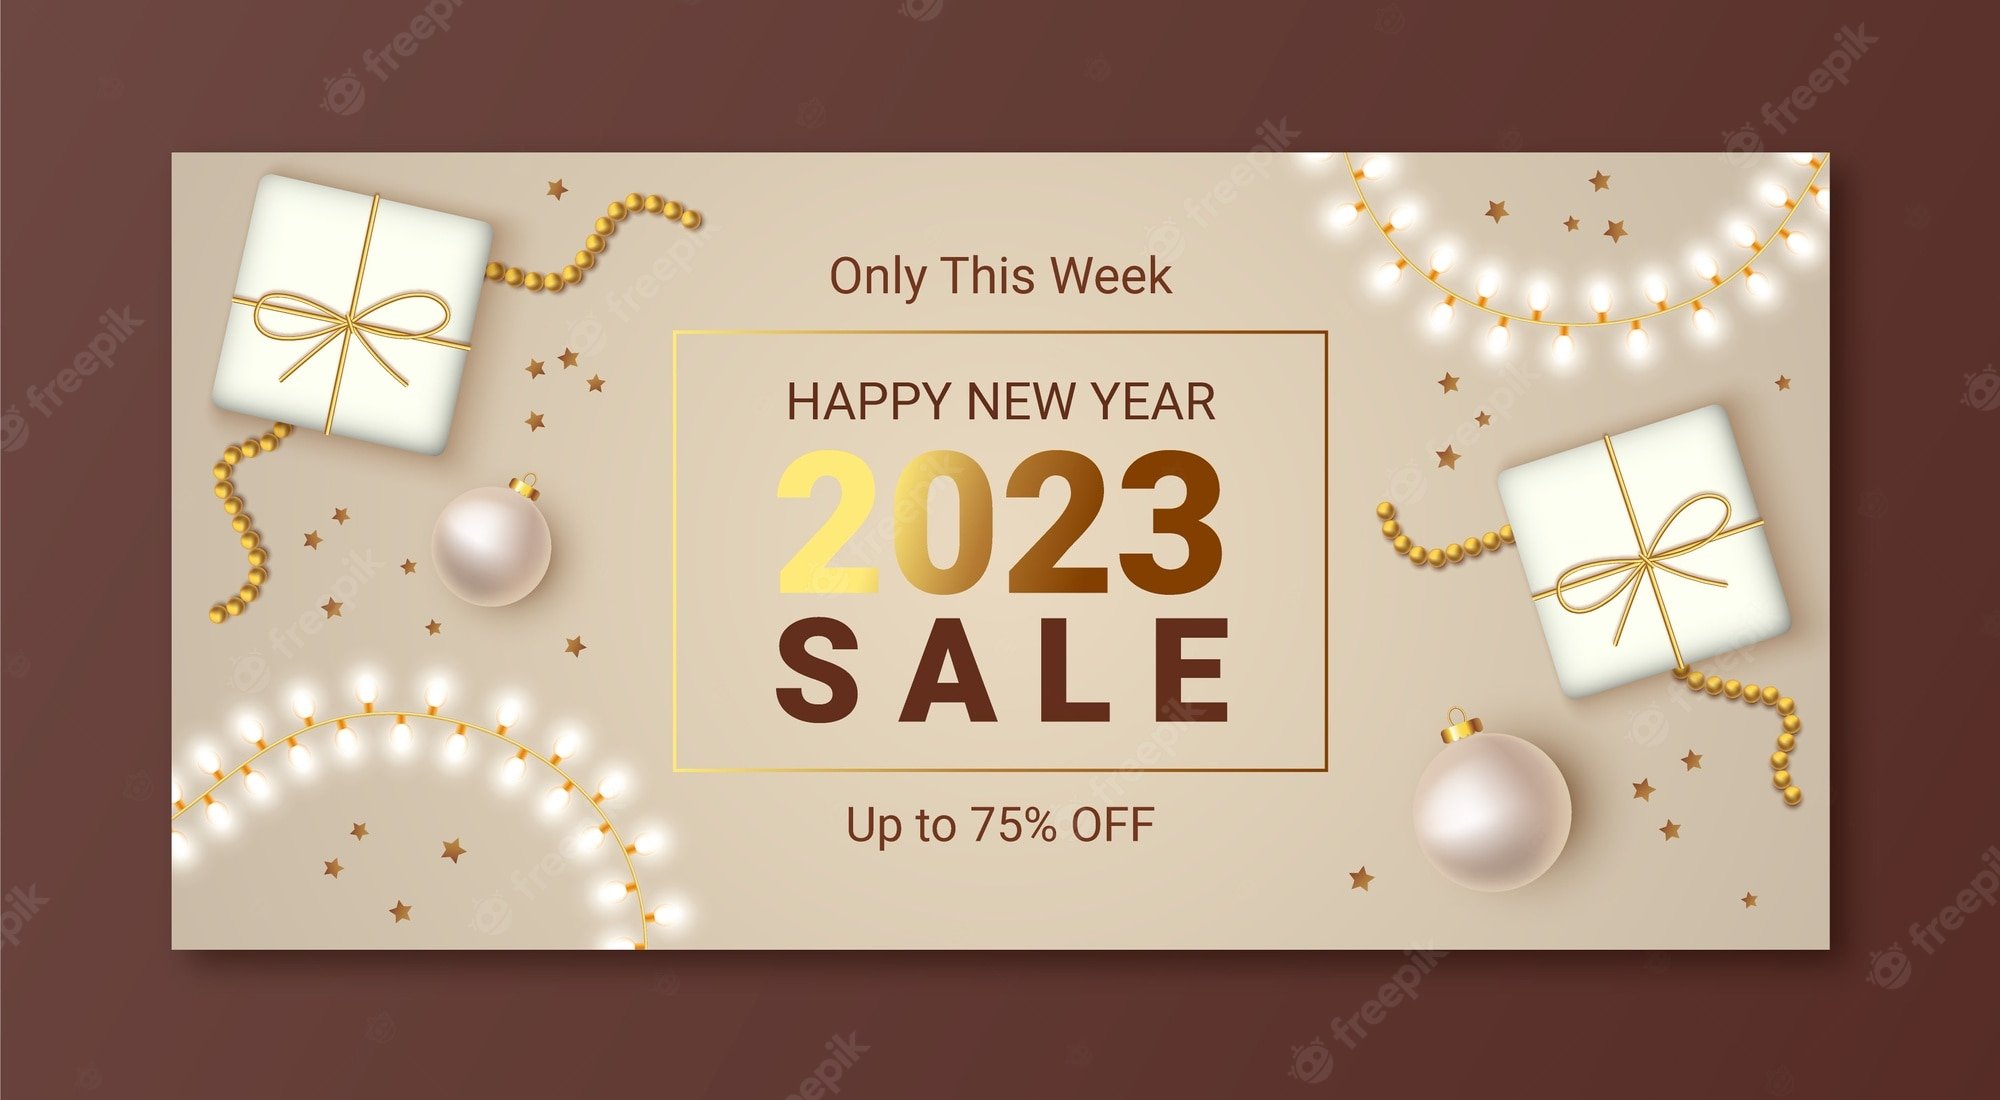 Free Vector | Realistic new year 2023 horizontal sale banner template